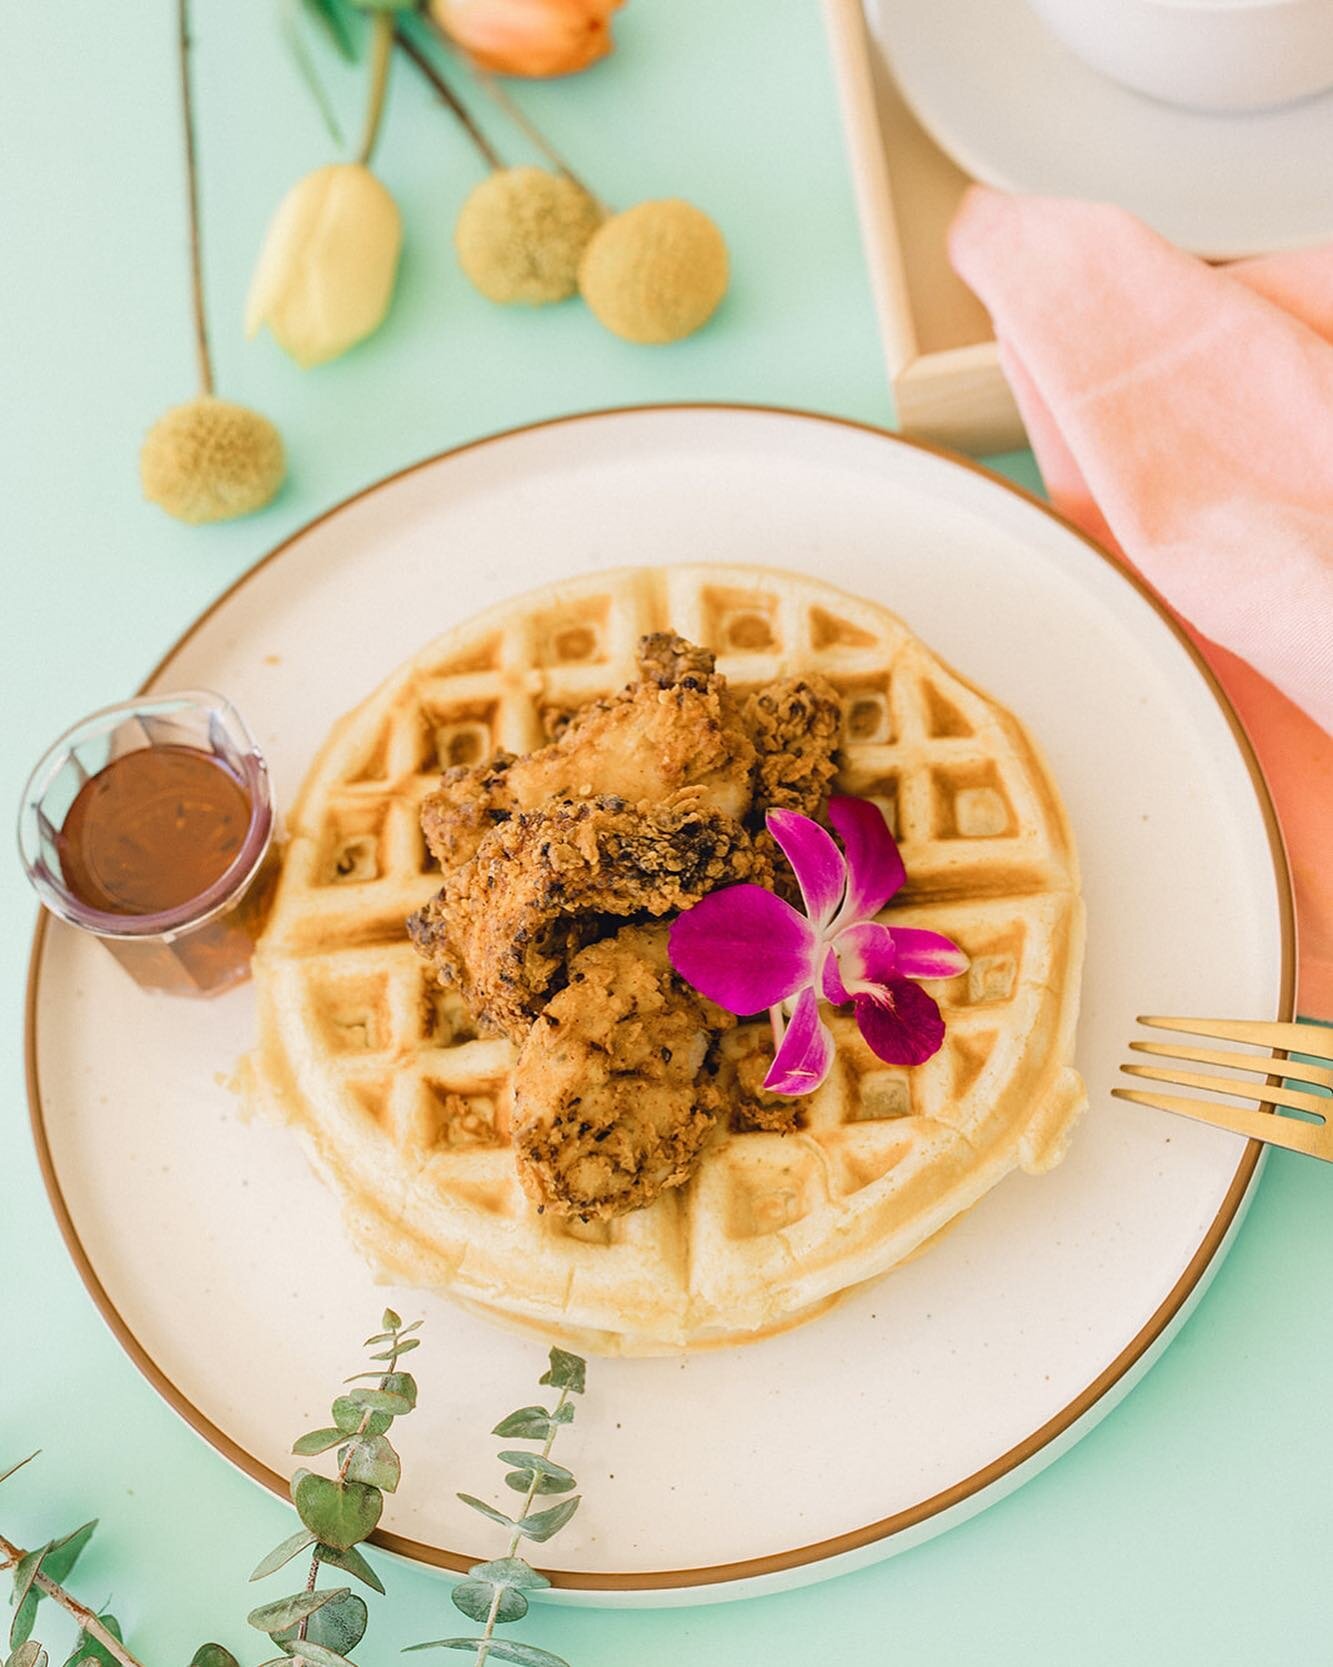 Happy Saturday! Our fall menu is NOW available all weekend long! 😍 We are so happy and proud to be the first restaurant in the Triangle who is serving halal chicken &amp; waffle! 💛

Stop by this weekend and try our new classic dish!

#pineapplesol 